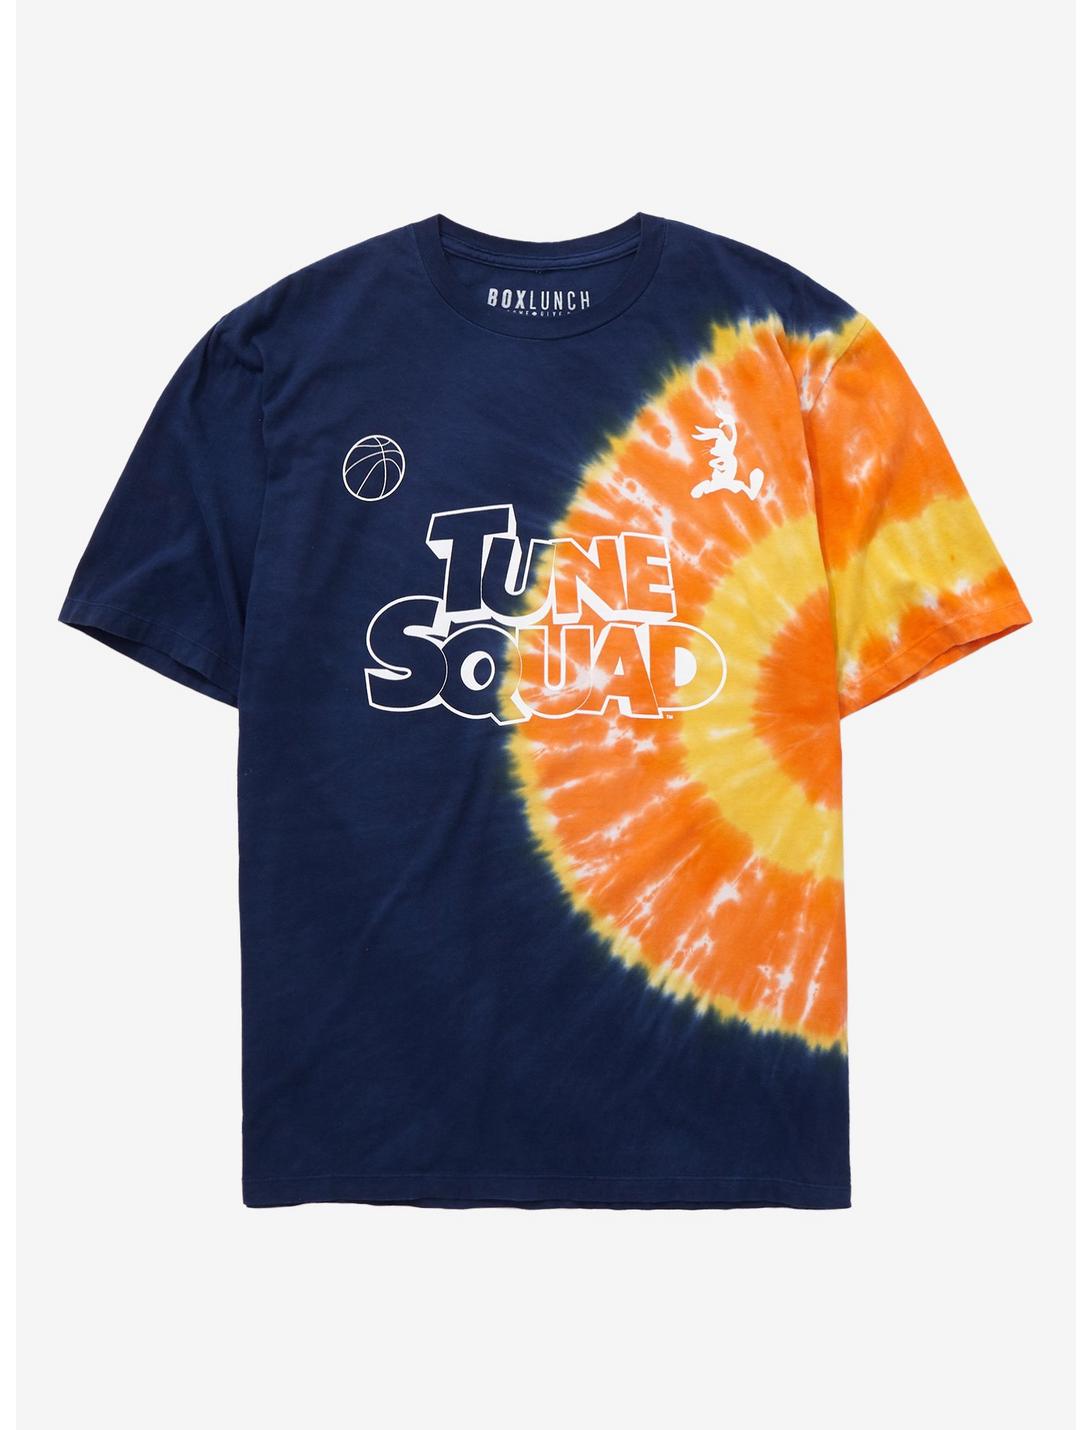 Space Jam: A New Legacy Tune Squad Tie-Dye T-Shirt - BoxLunch Exclusive, MULTI, hi-res